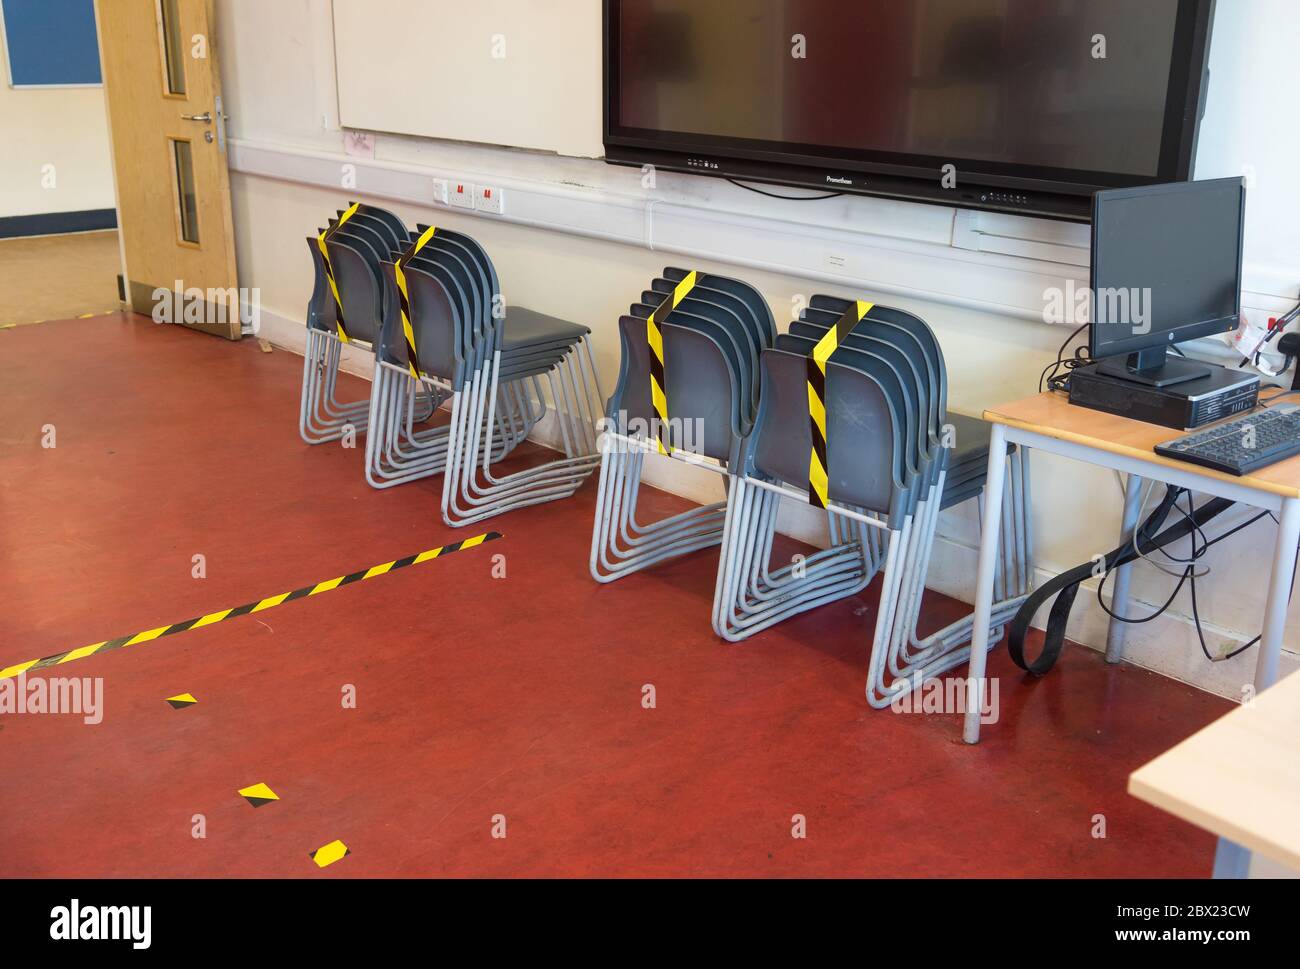 Social distancing measures in a school classroom with tape separating tables and chairs in response to the COVID-19 Coronavirus. Stock Photo